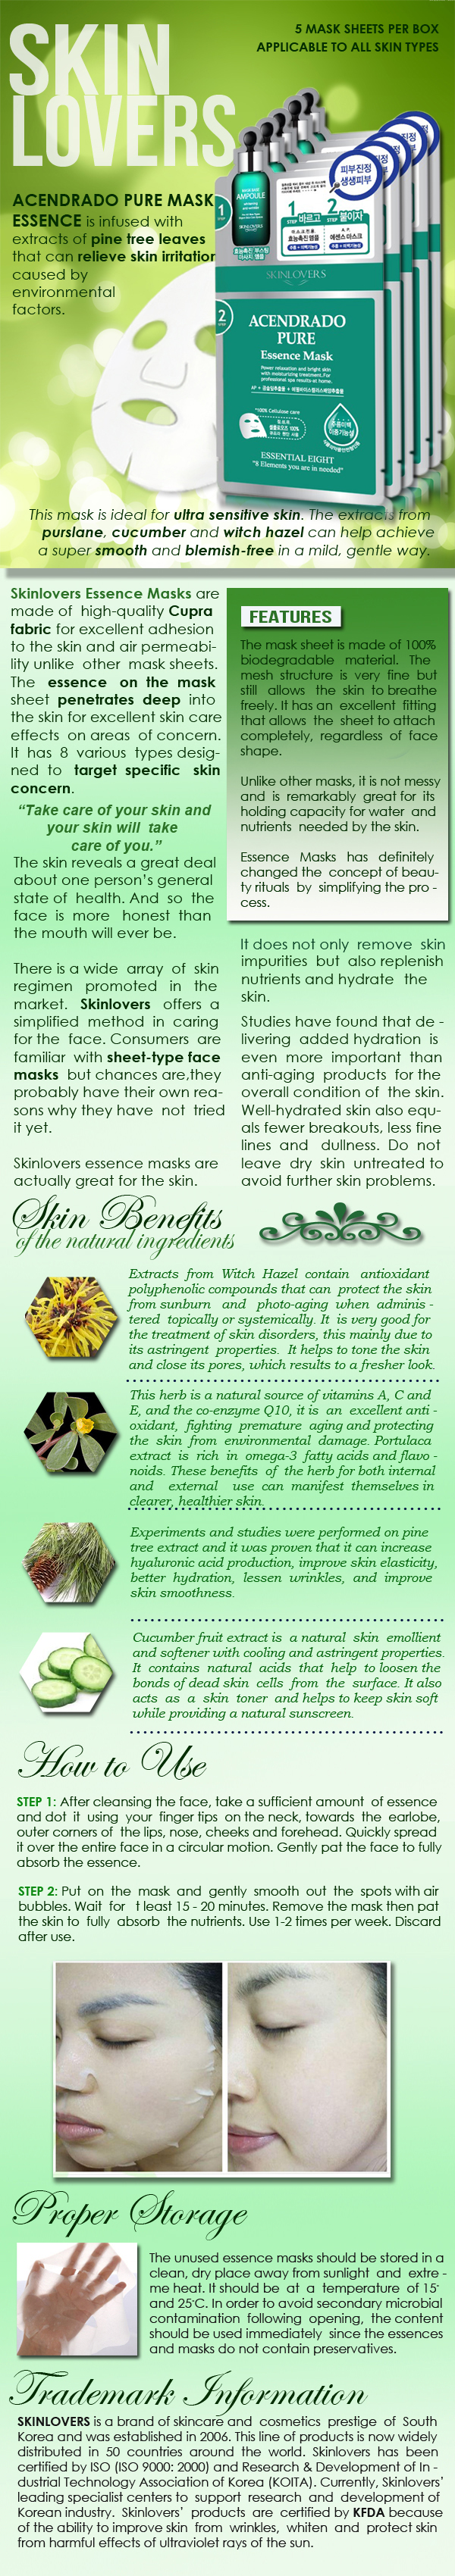 Skinlovers Acendrado Pure Essence Mask Product Information